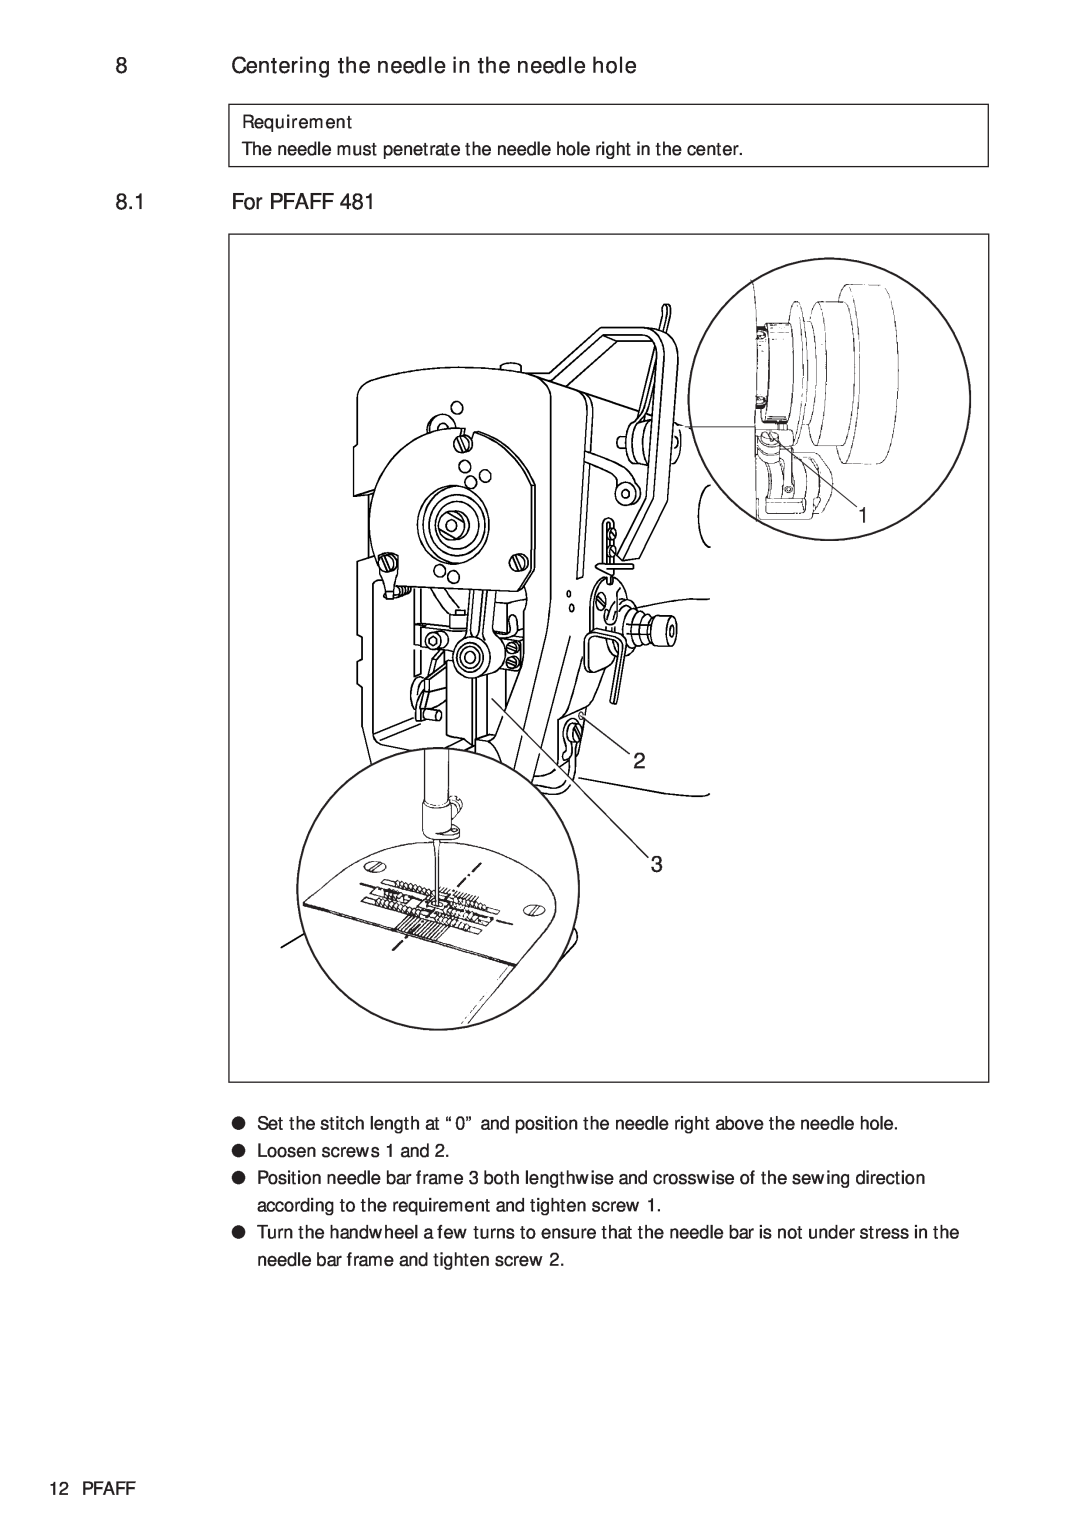 Pfaff 481, 483 service manual Centering the needle in the needle hole, For PFAFF 